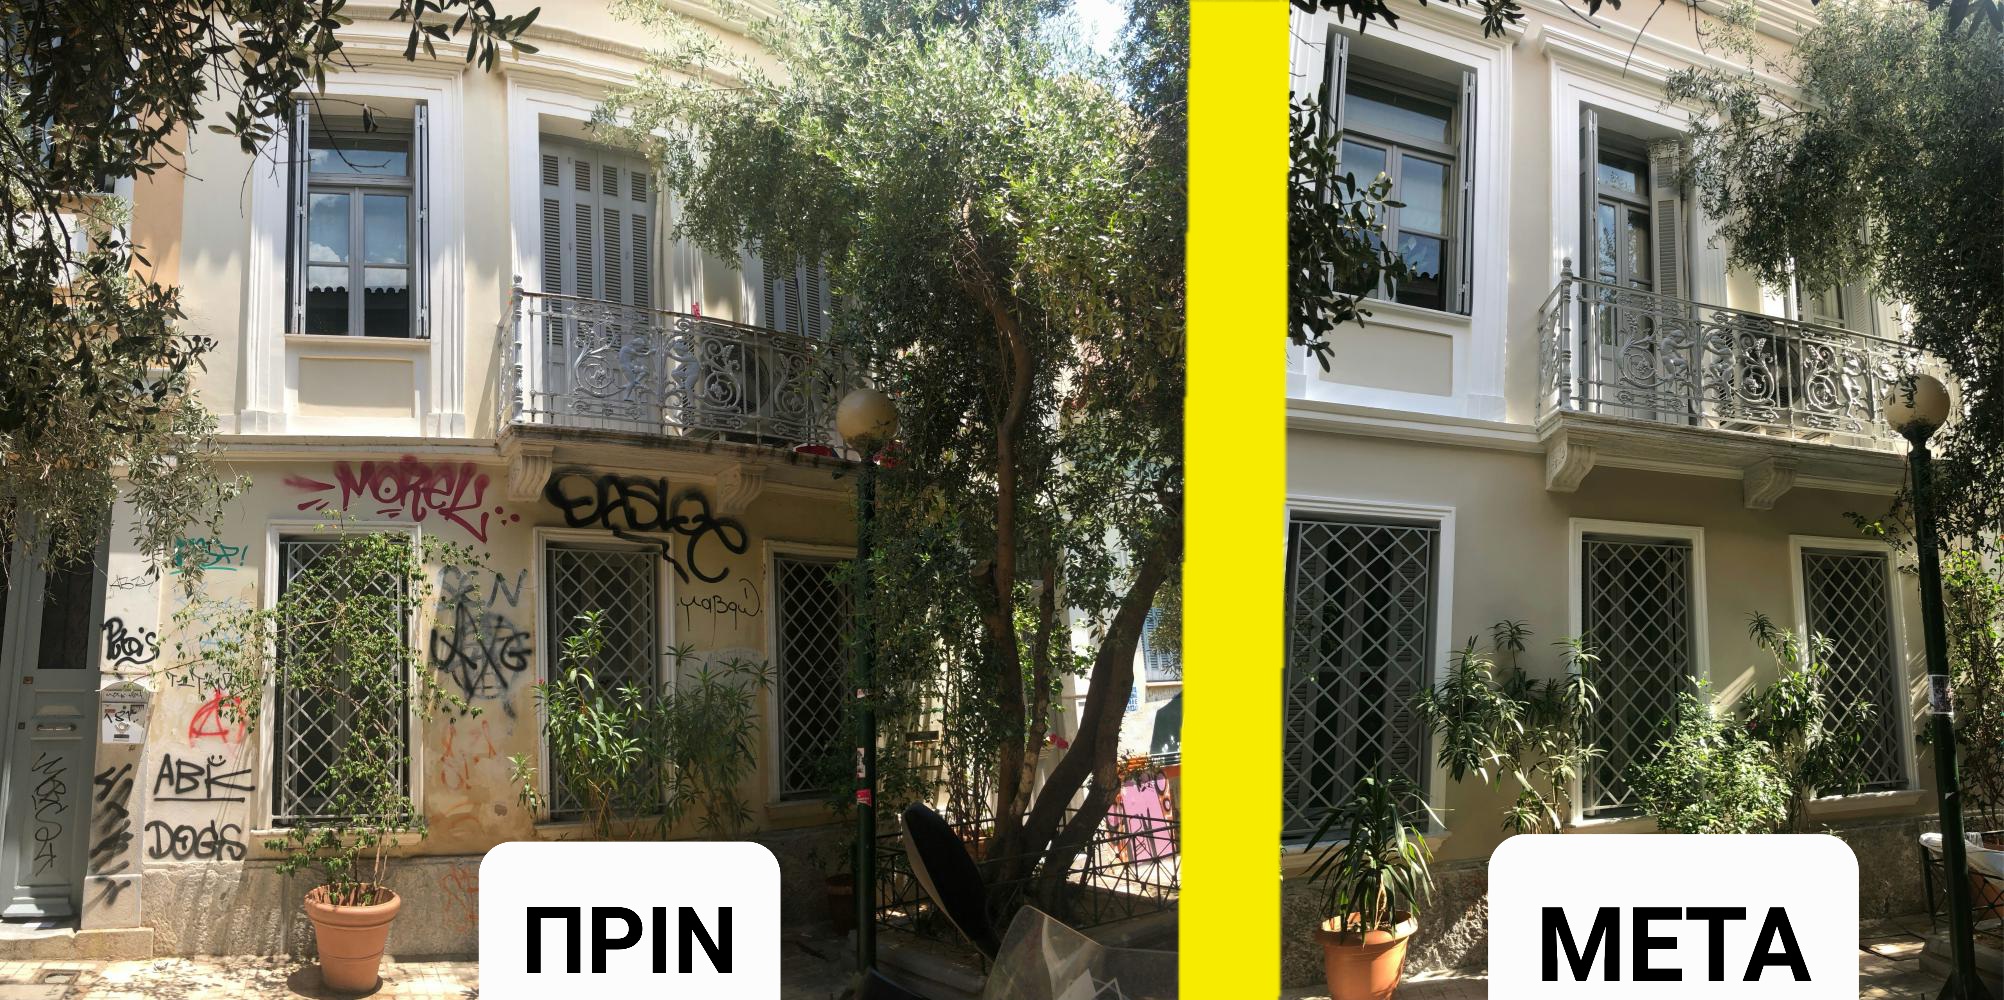 First delivered refurbishments funded by the "Prosopsi" program are changing the vibe in the Athenian neighborhoods